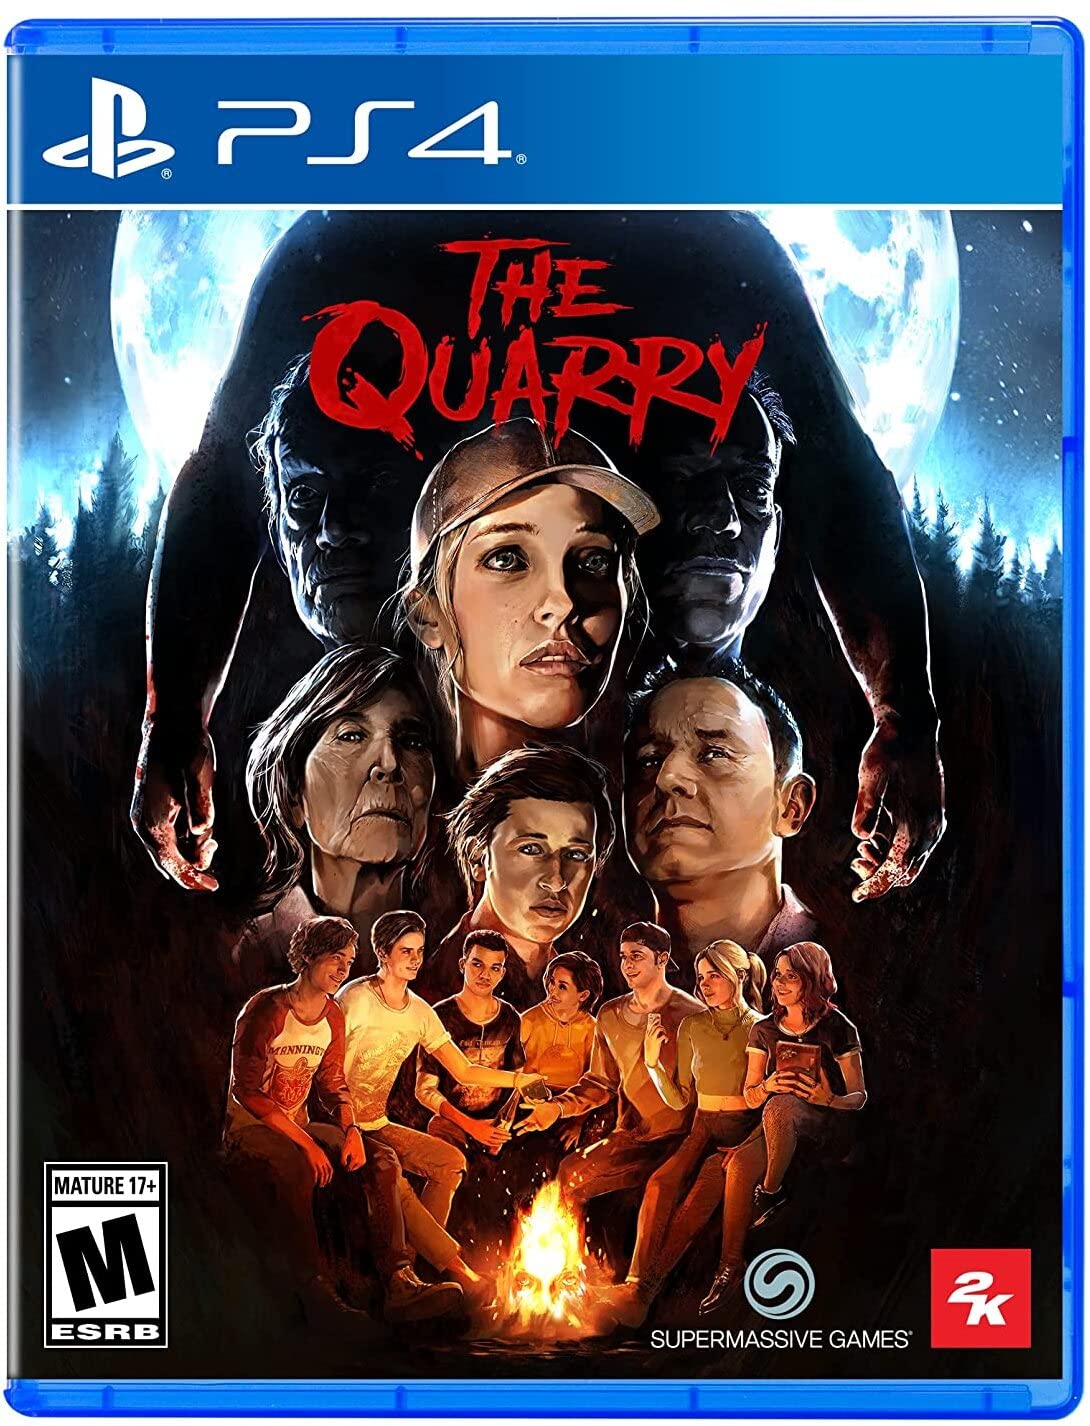 $14.99: The Quarry (PS4 or Xbox One) Amazon